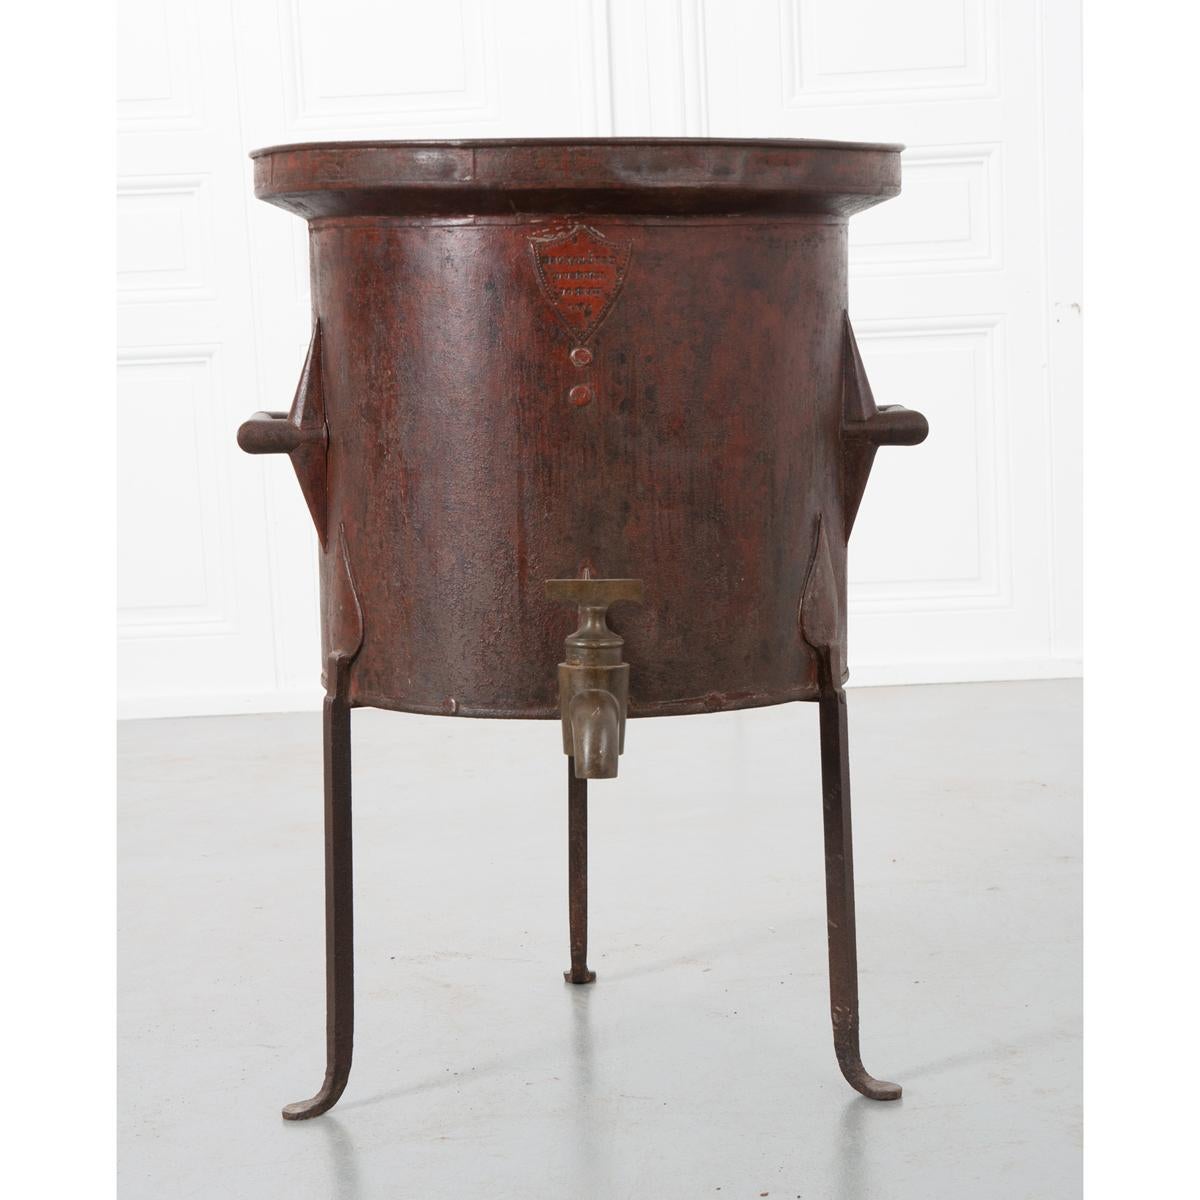 This rare, painted tole and brass wine barrel was used by wineries to measure and pour their wines into bottles in preparation for consumption or sale. The tole and old paint have developed a wonderful patina over time. It is mounted with a pair of